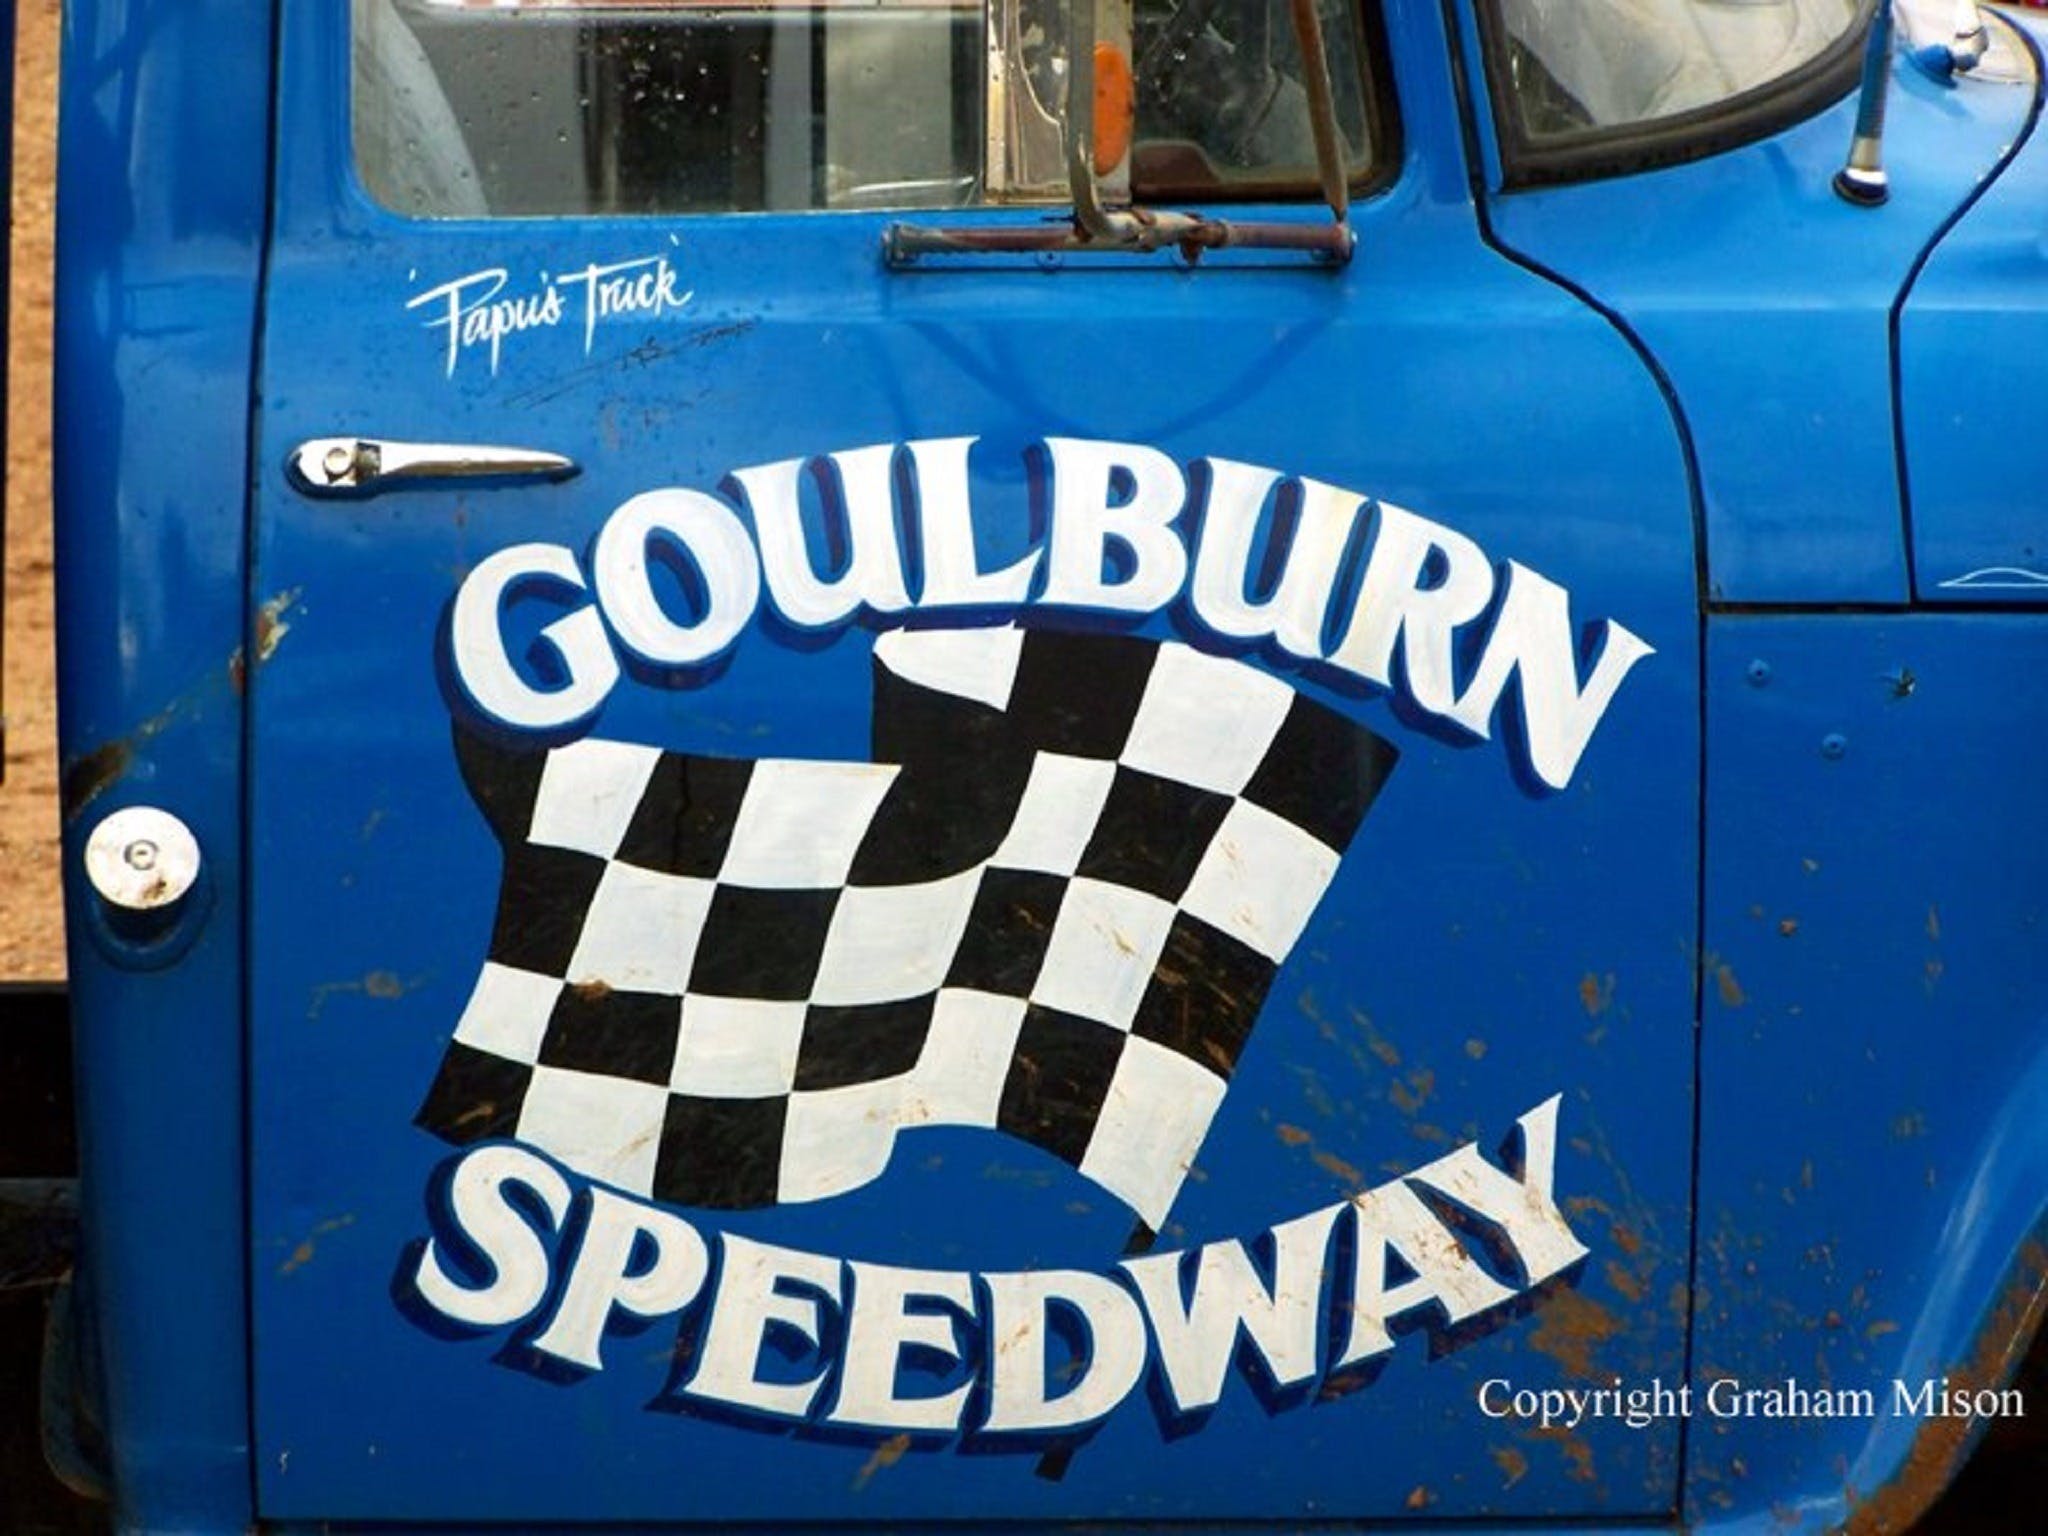 50 years of racing at Goulburn Speedway - Broome Tourism